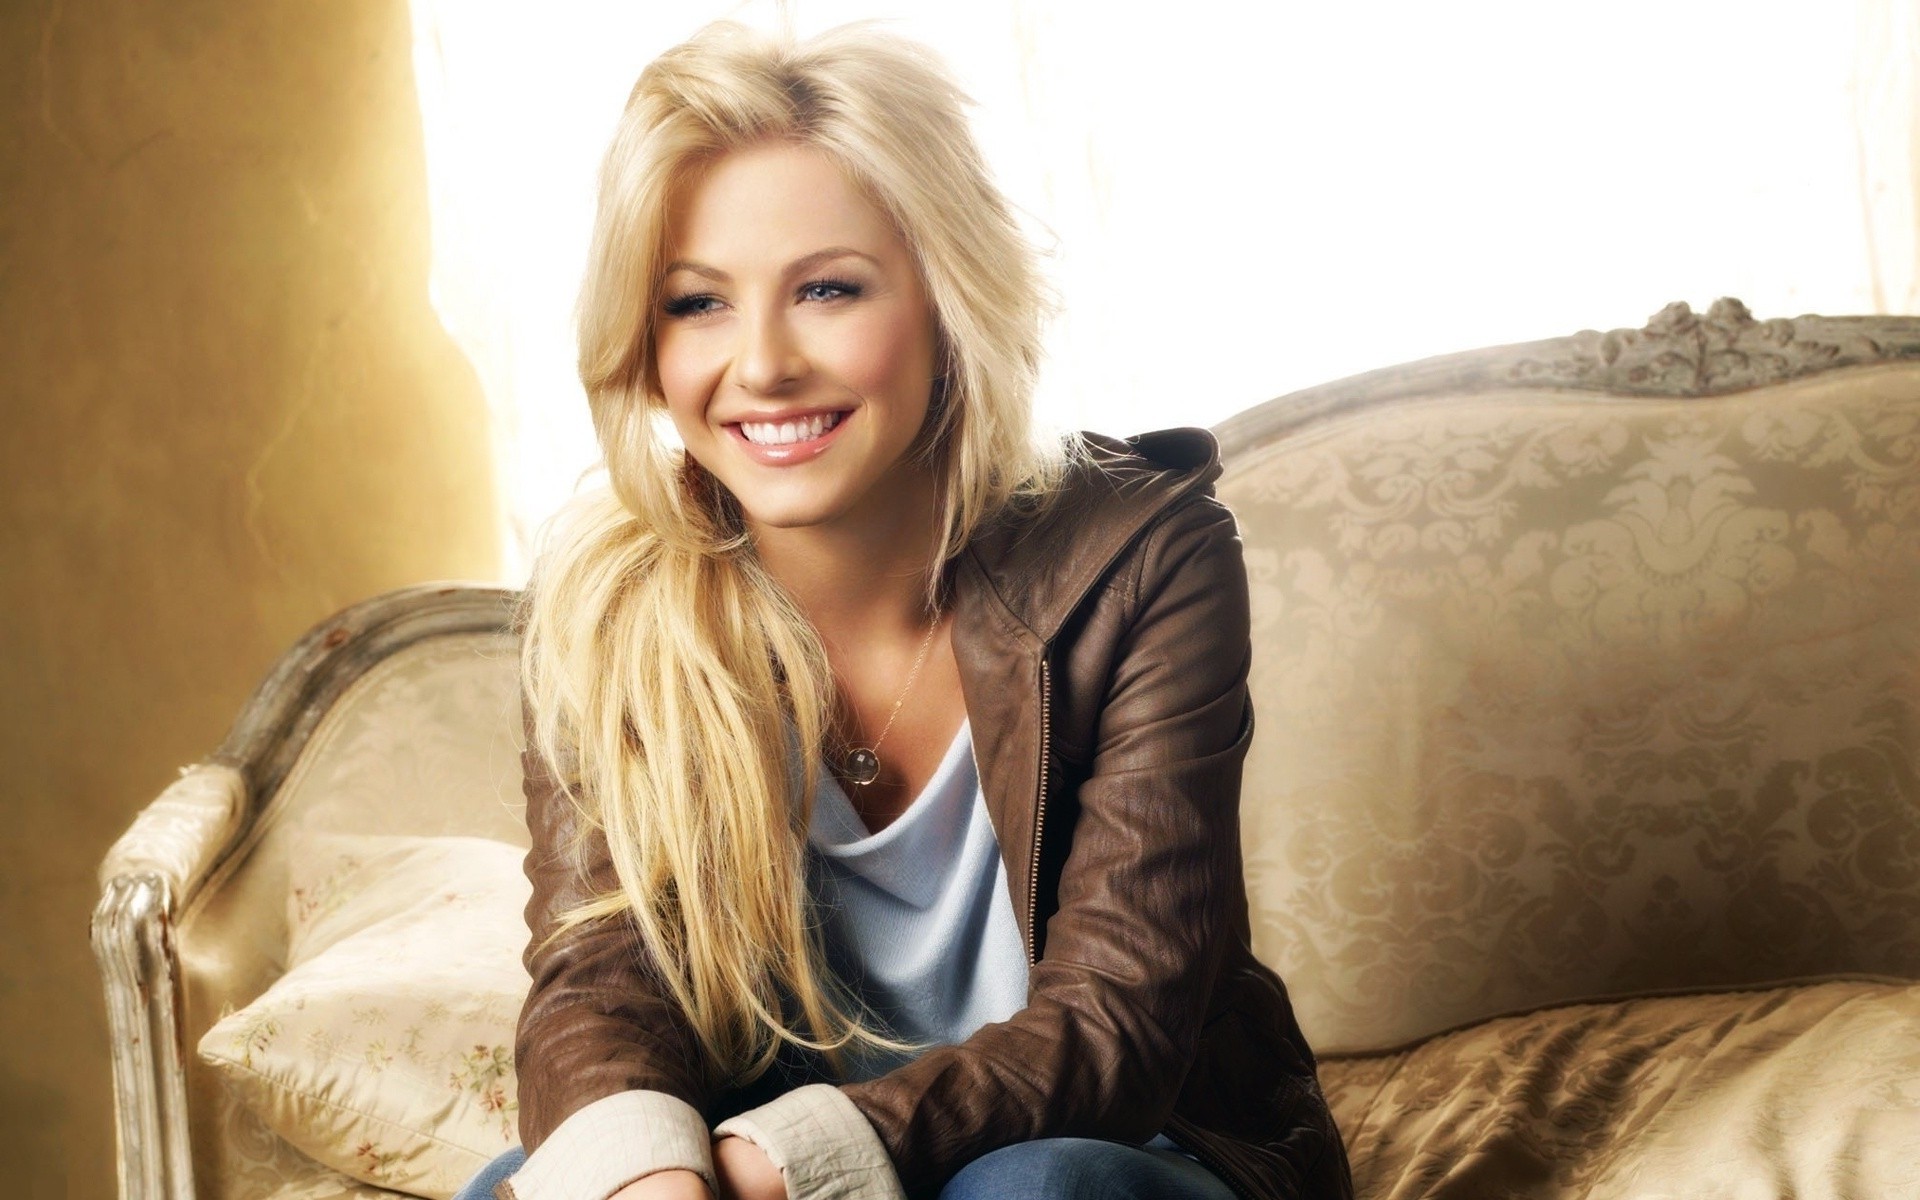 Women Wavy Hair Julianne Hough Leather Jackets Jacket Actress Sitting Blonde Smiling Open Mouth Blue 1920x1200